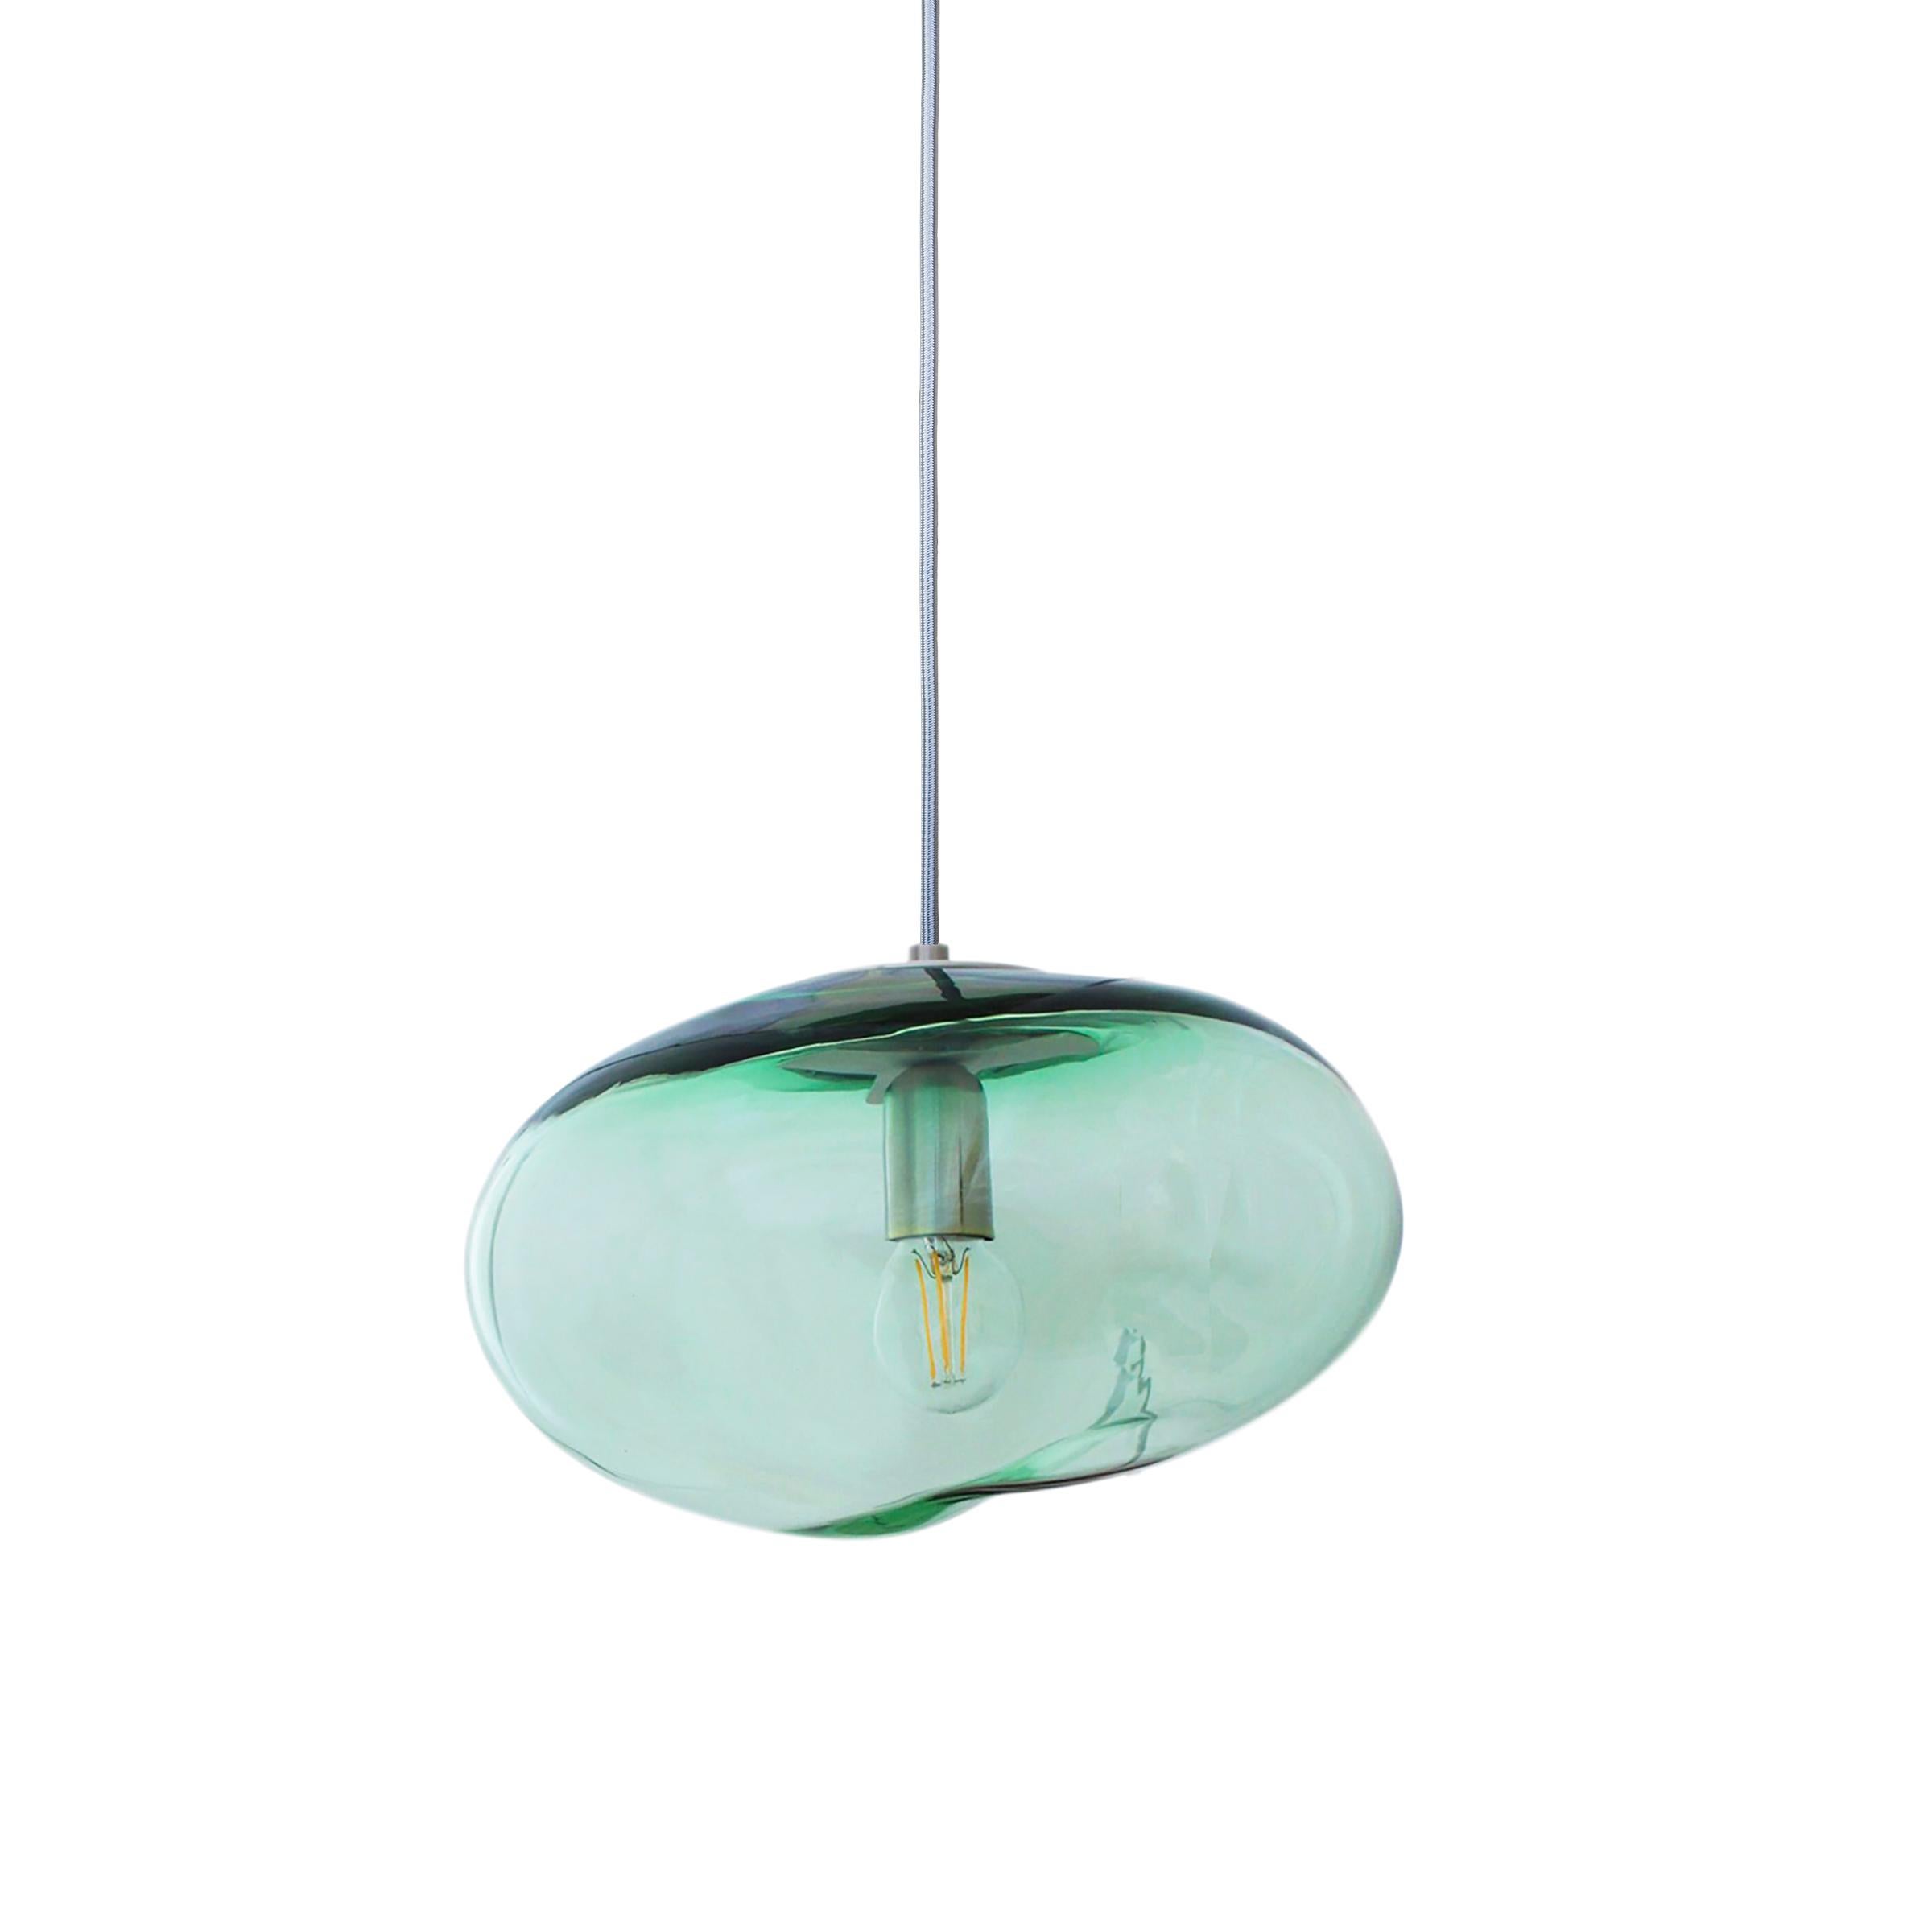 German Set of 2 Planetoide Green Iridescent Pendants by Eloa For Sale